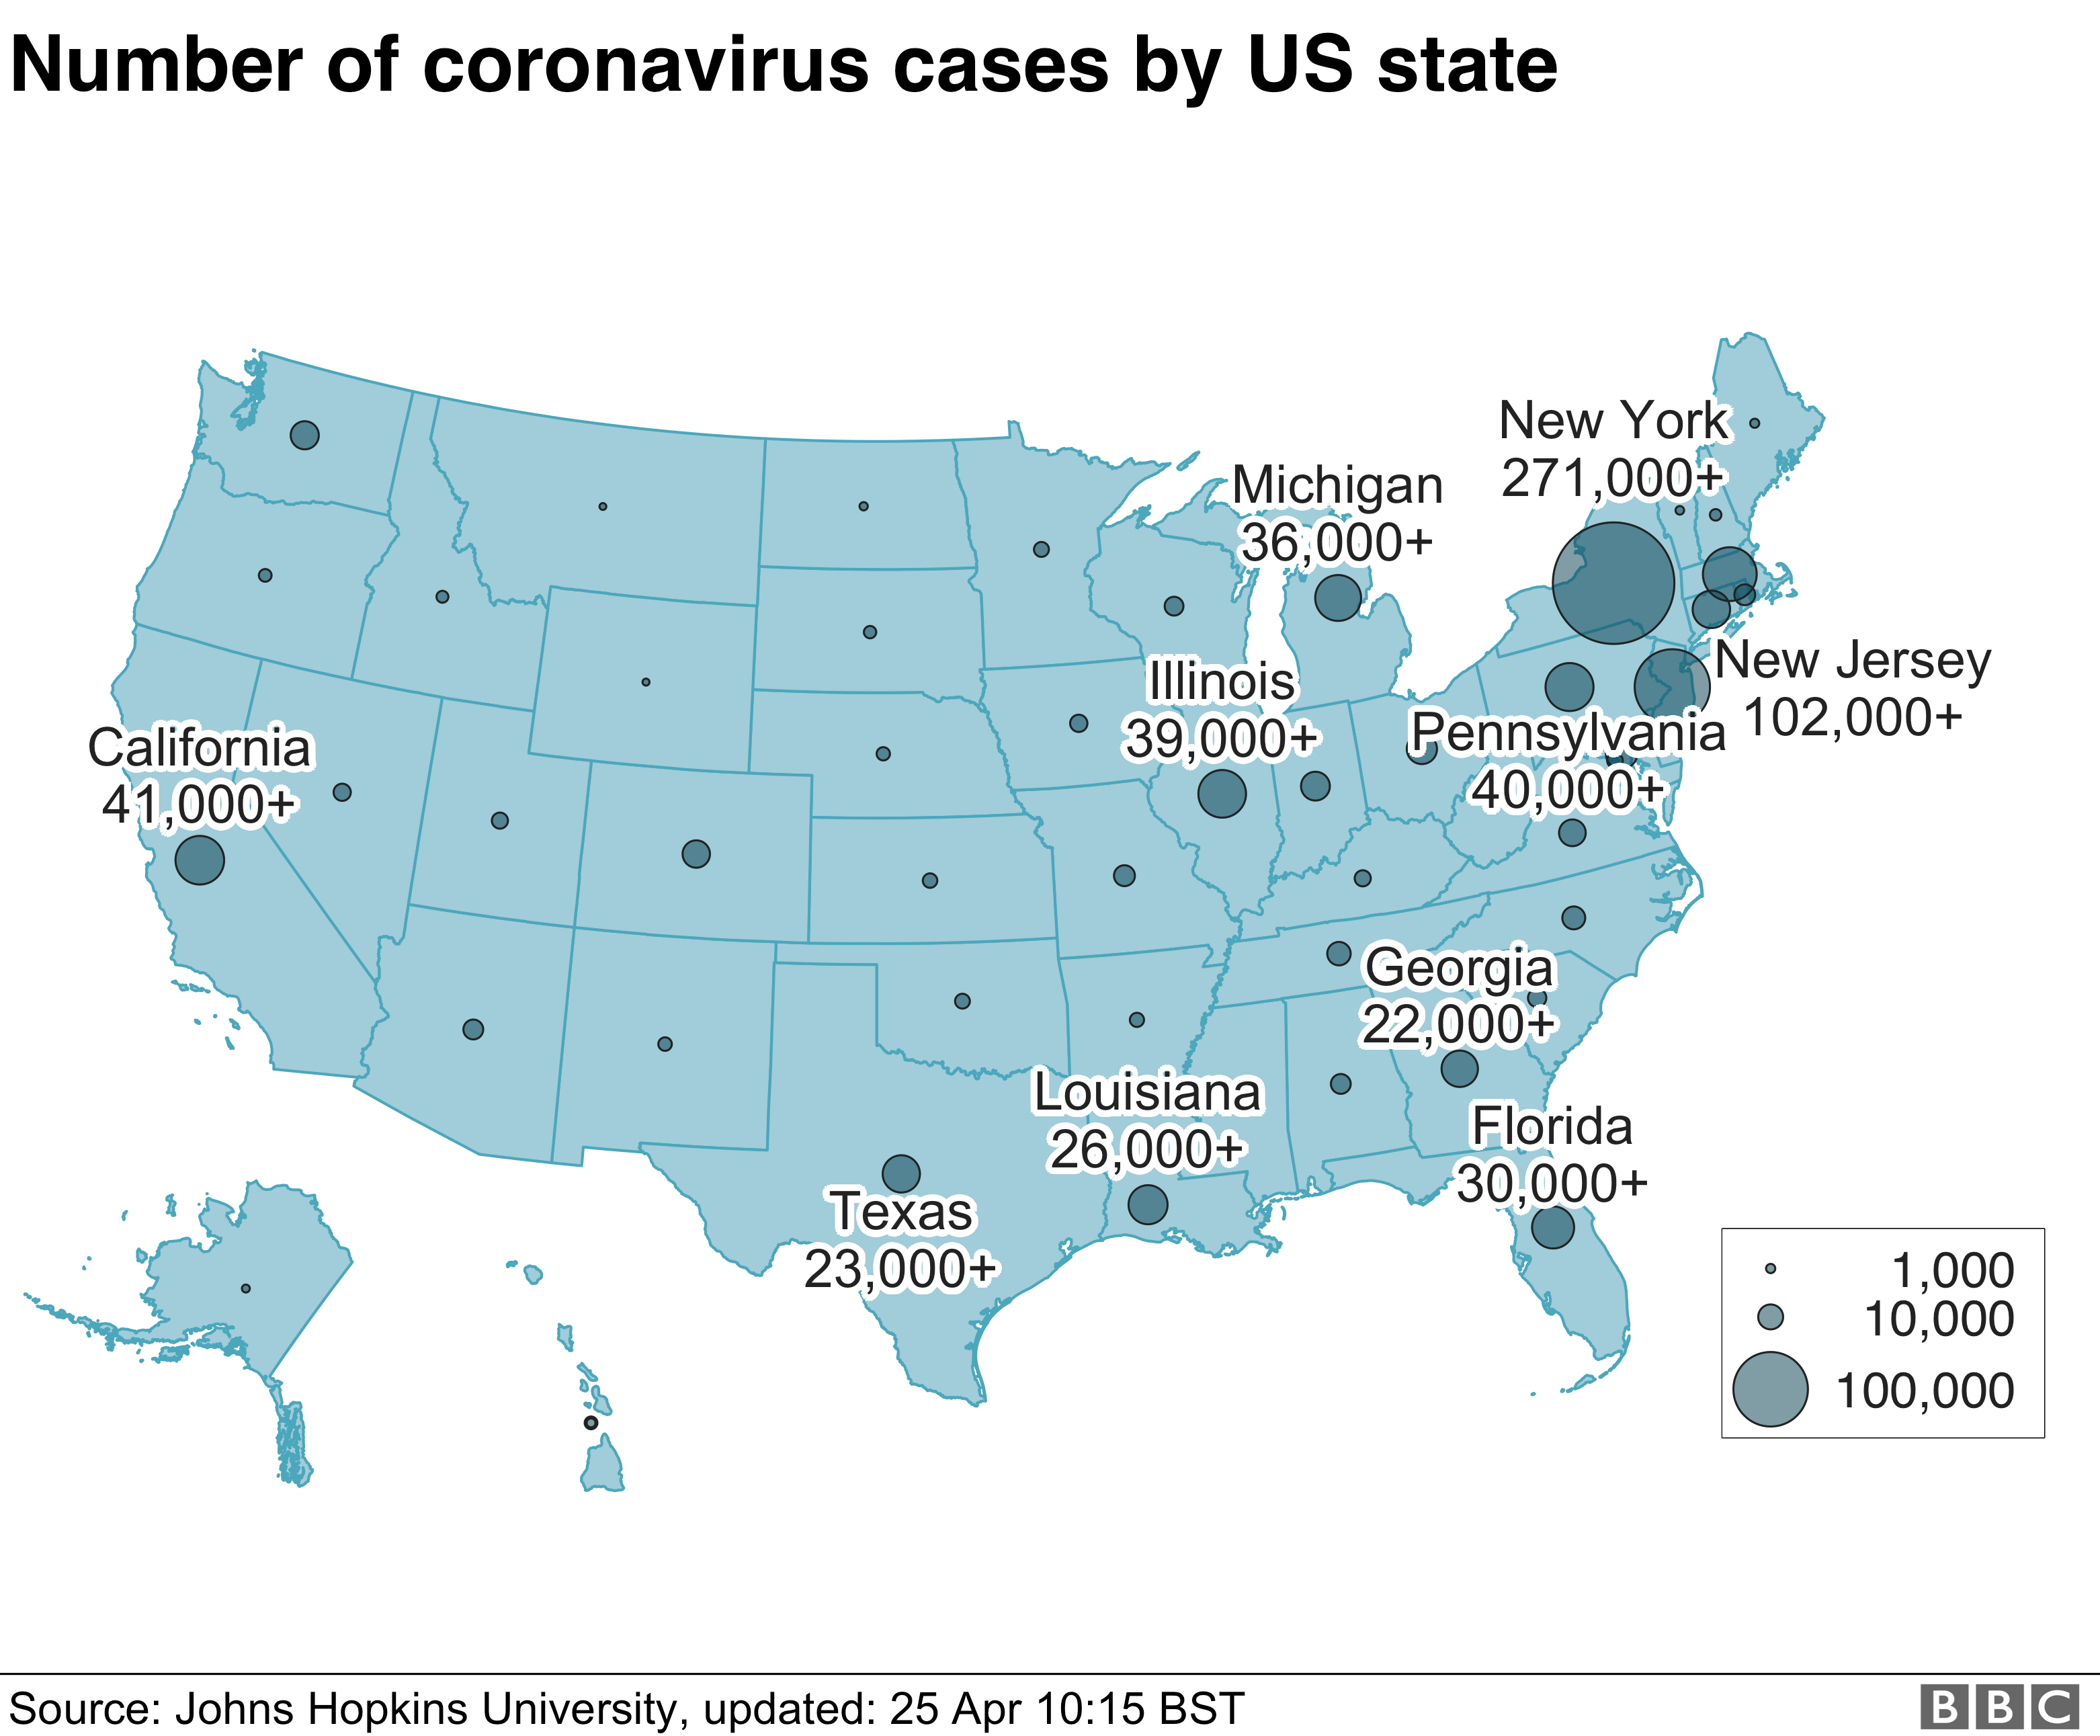 Map of US showing cases numbers by state